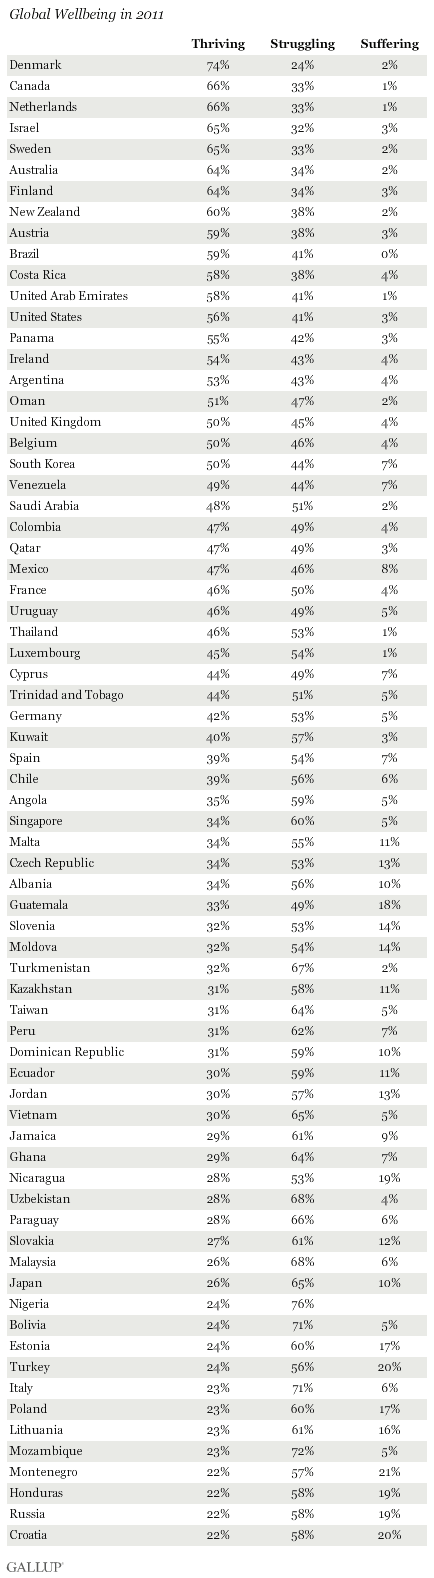 Global Wellbeing in 2011 - Countires with highest thriving percentages